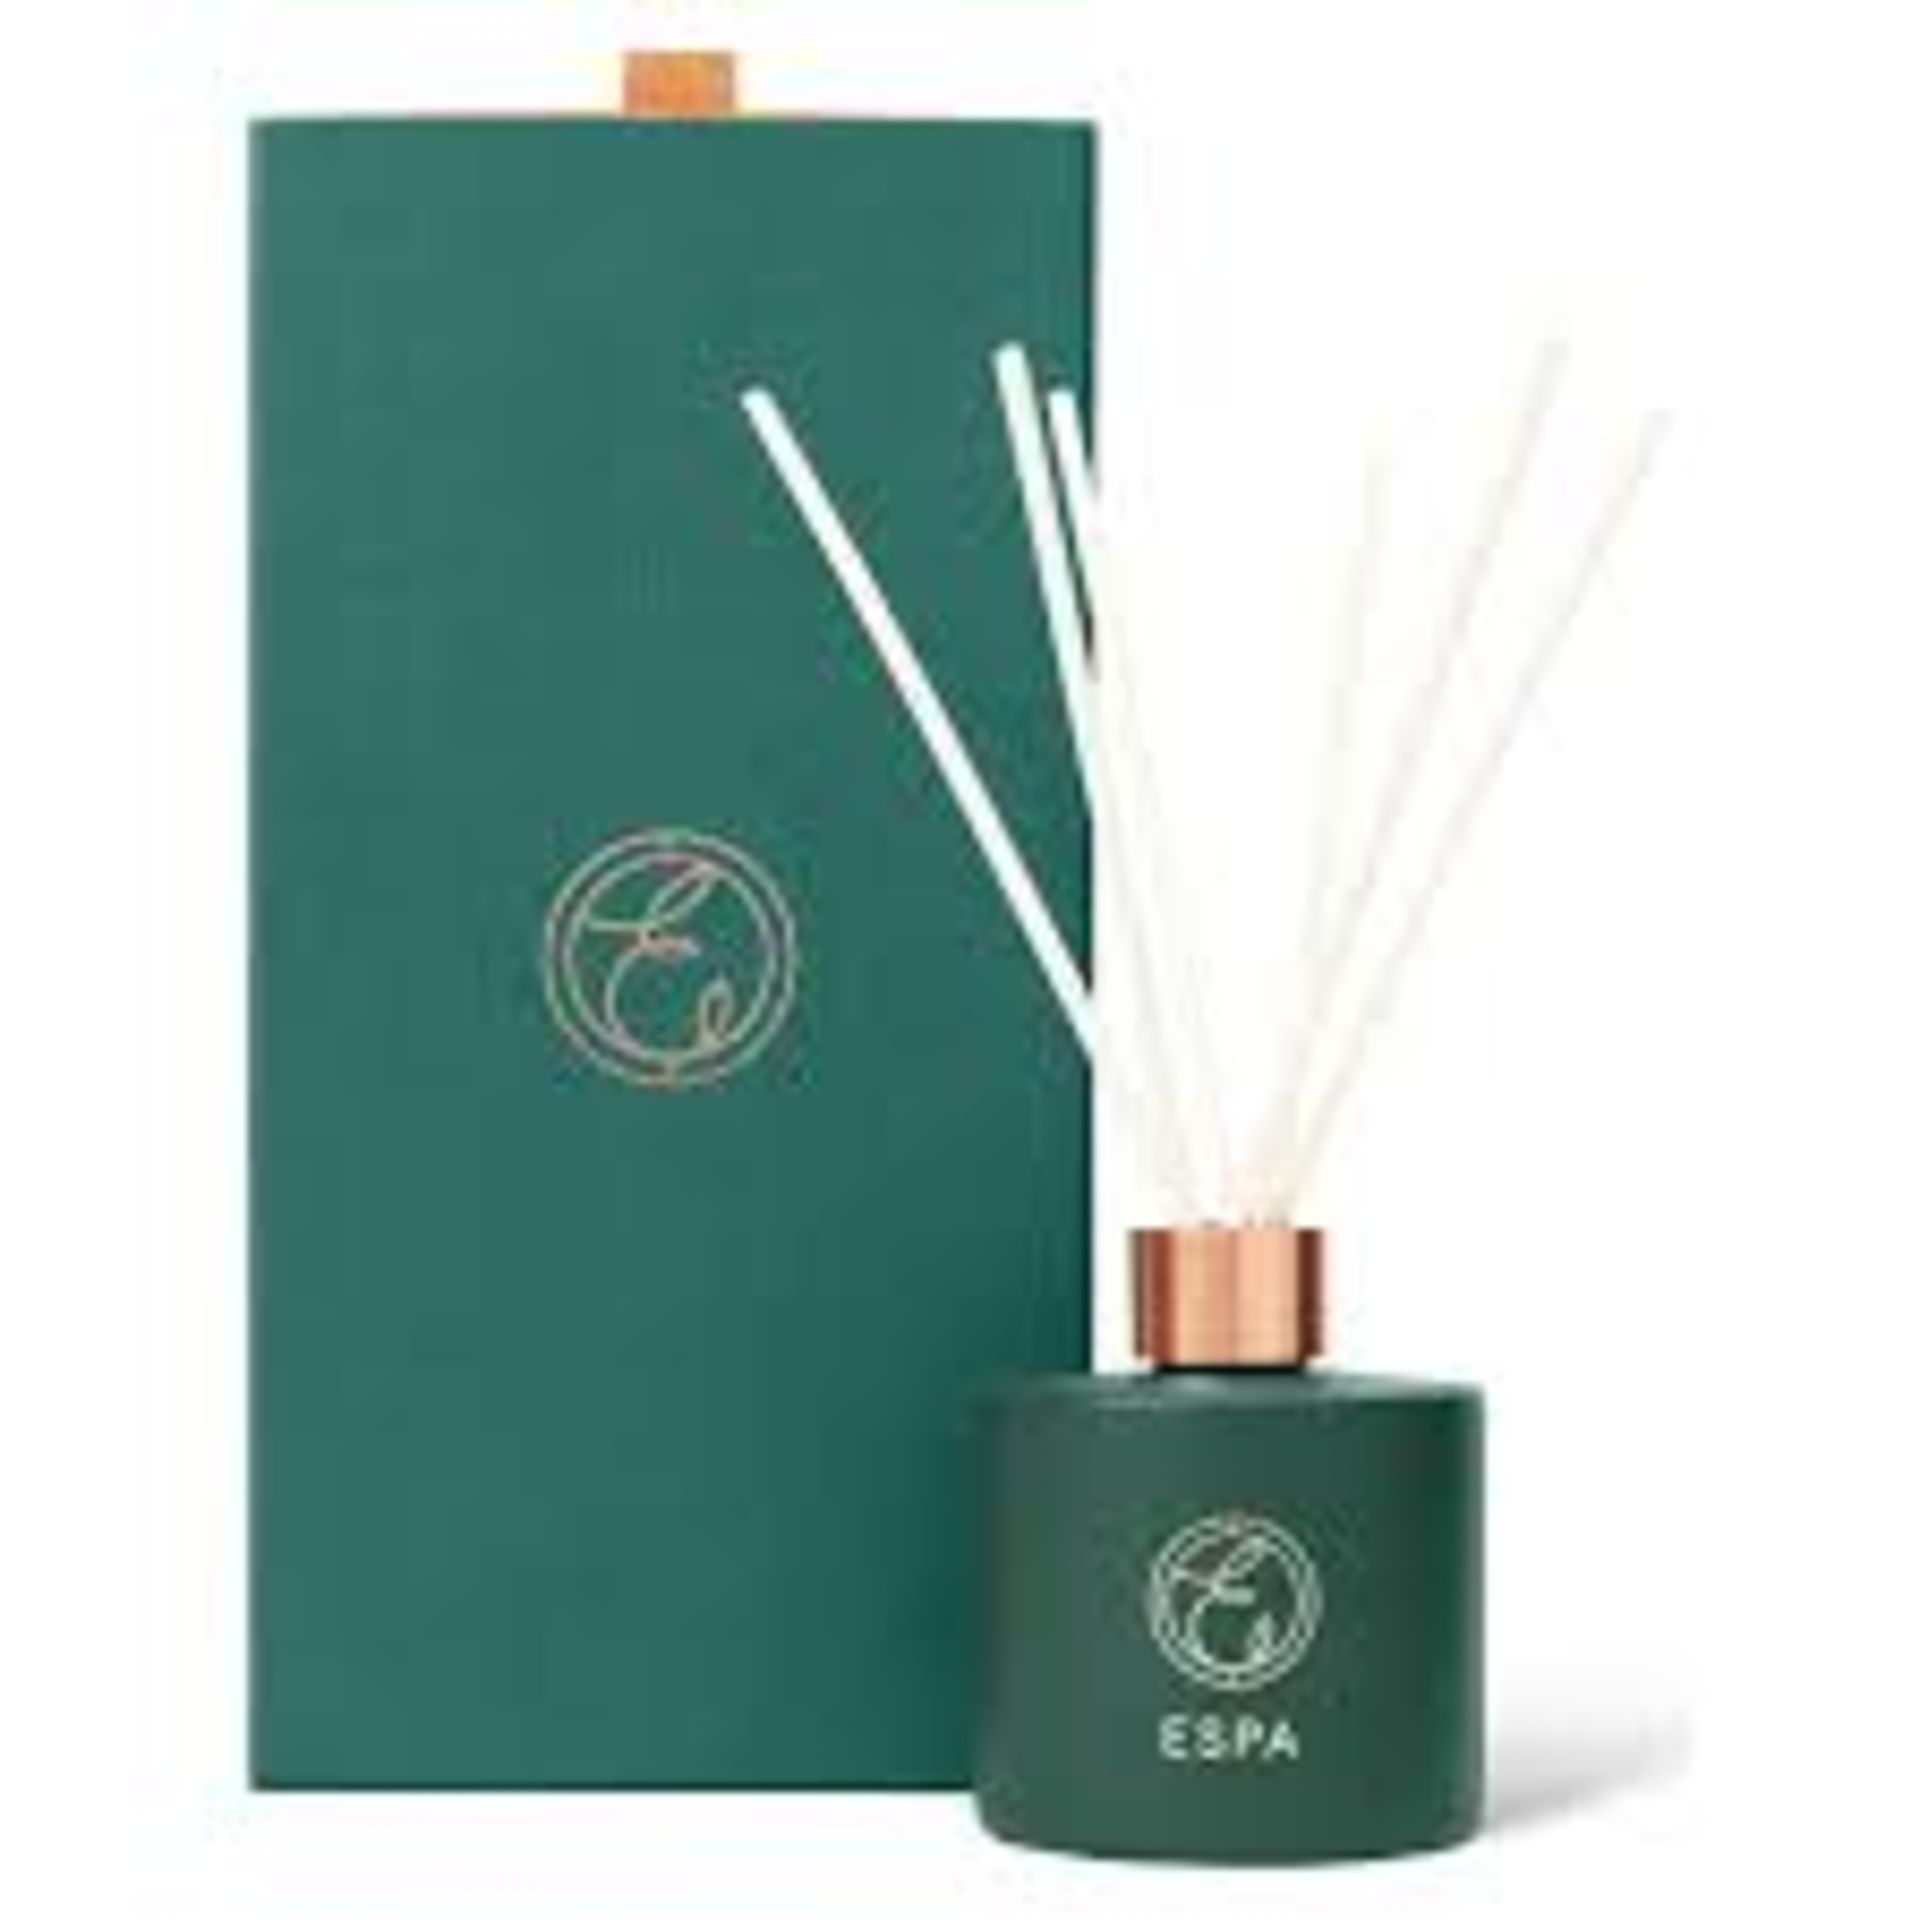 3 X BRAND NEW ESPA LIMITED EDITION WINTER SPICE REED DIFFUSER 200ML RRP £42 EACH EBR